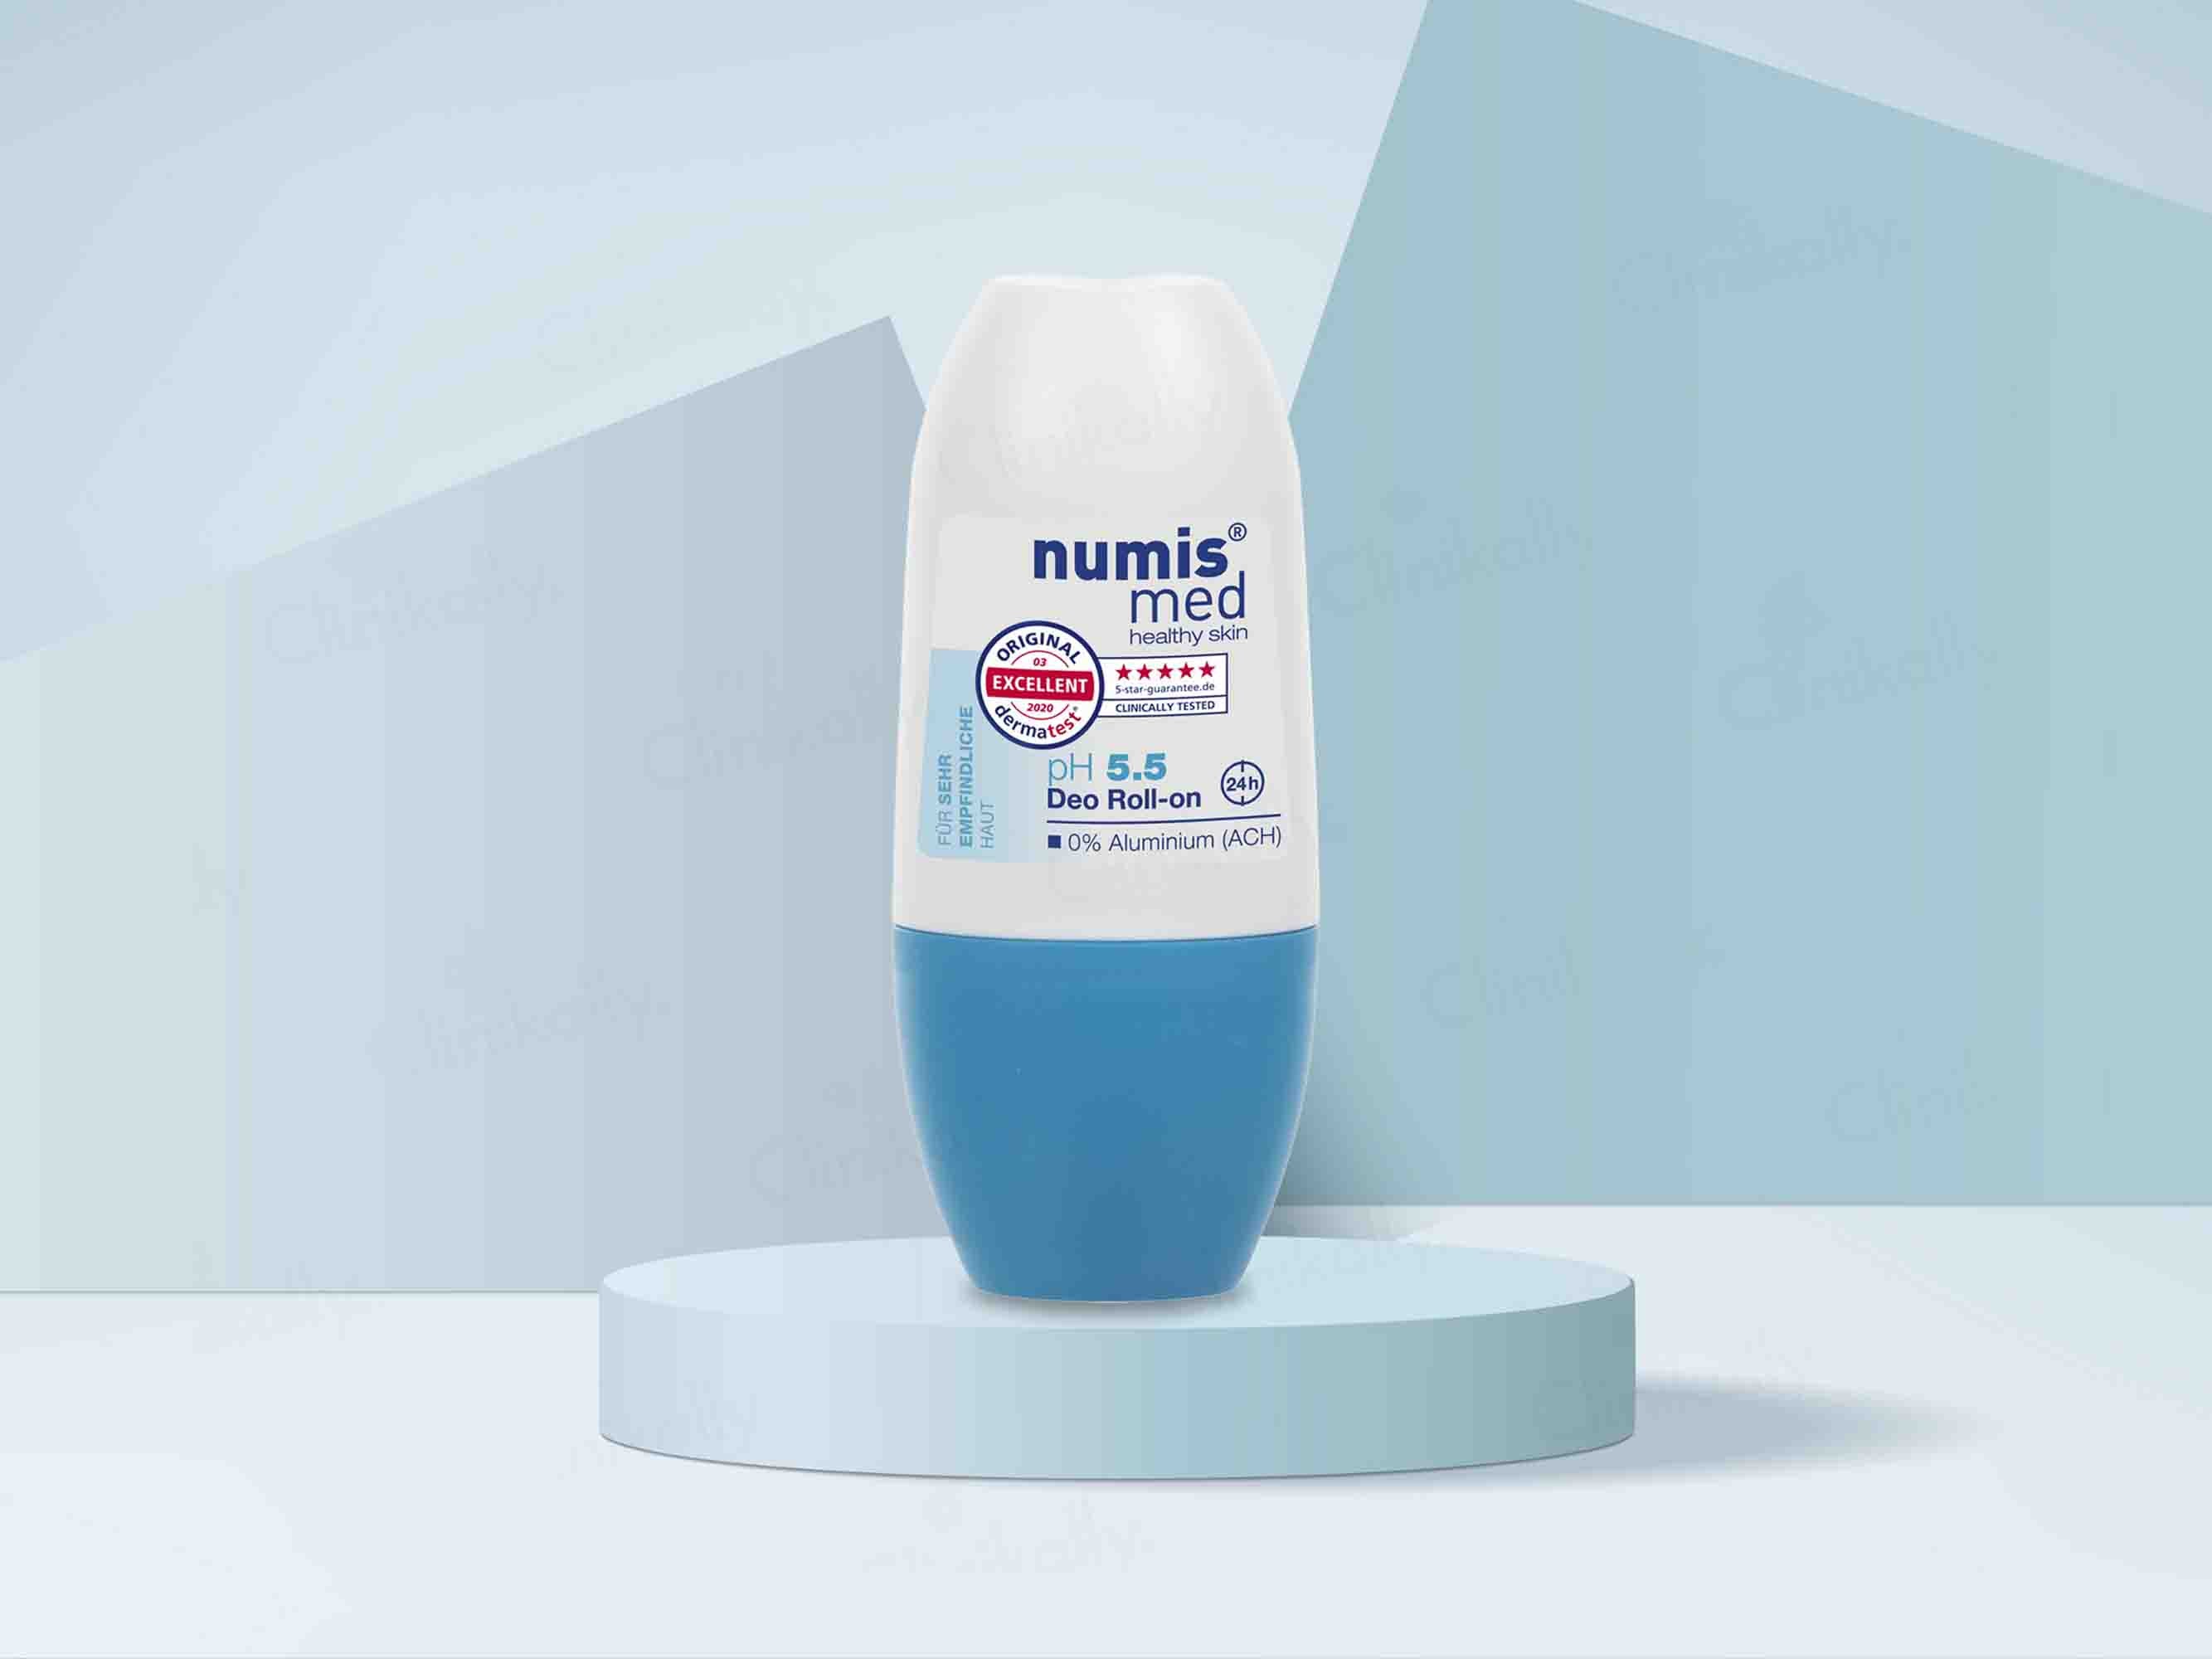 Numis Med pH 5.5 Deo Roll-on For Very Sensitive Skin - Clinikally